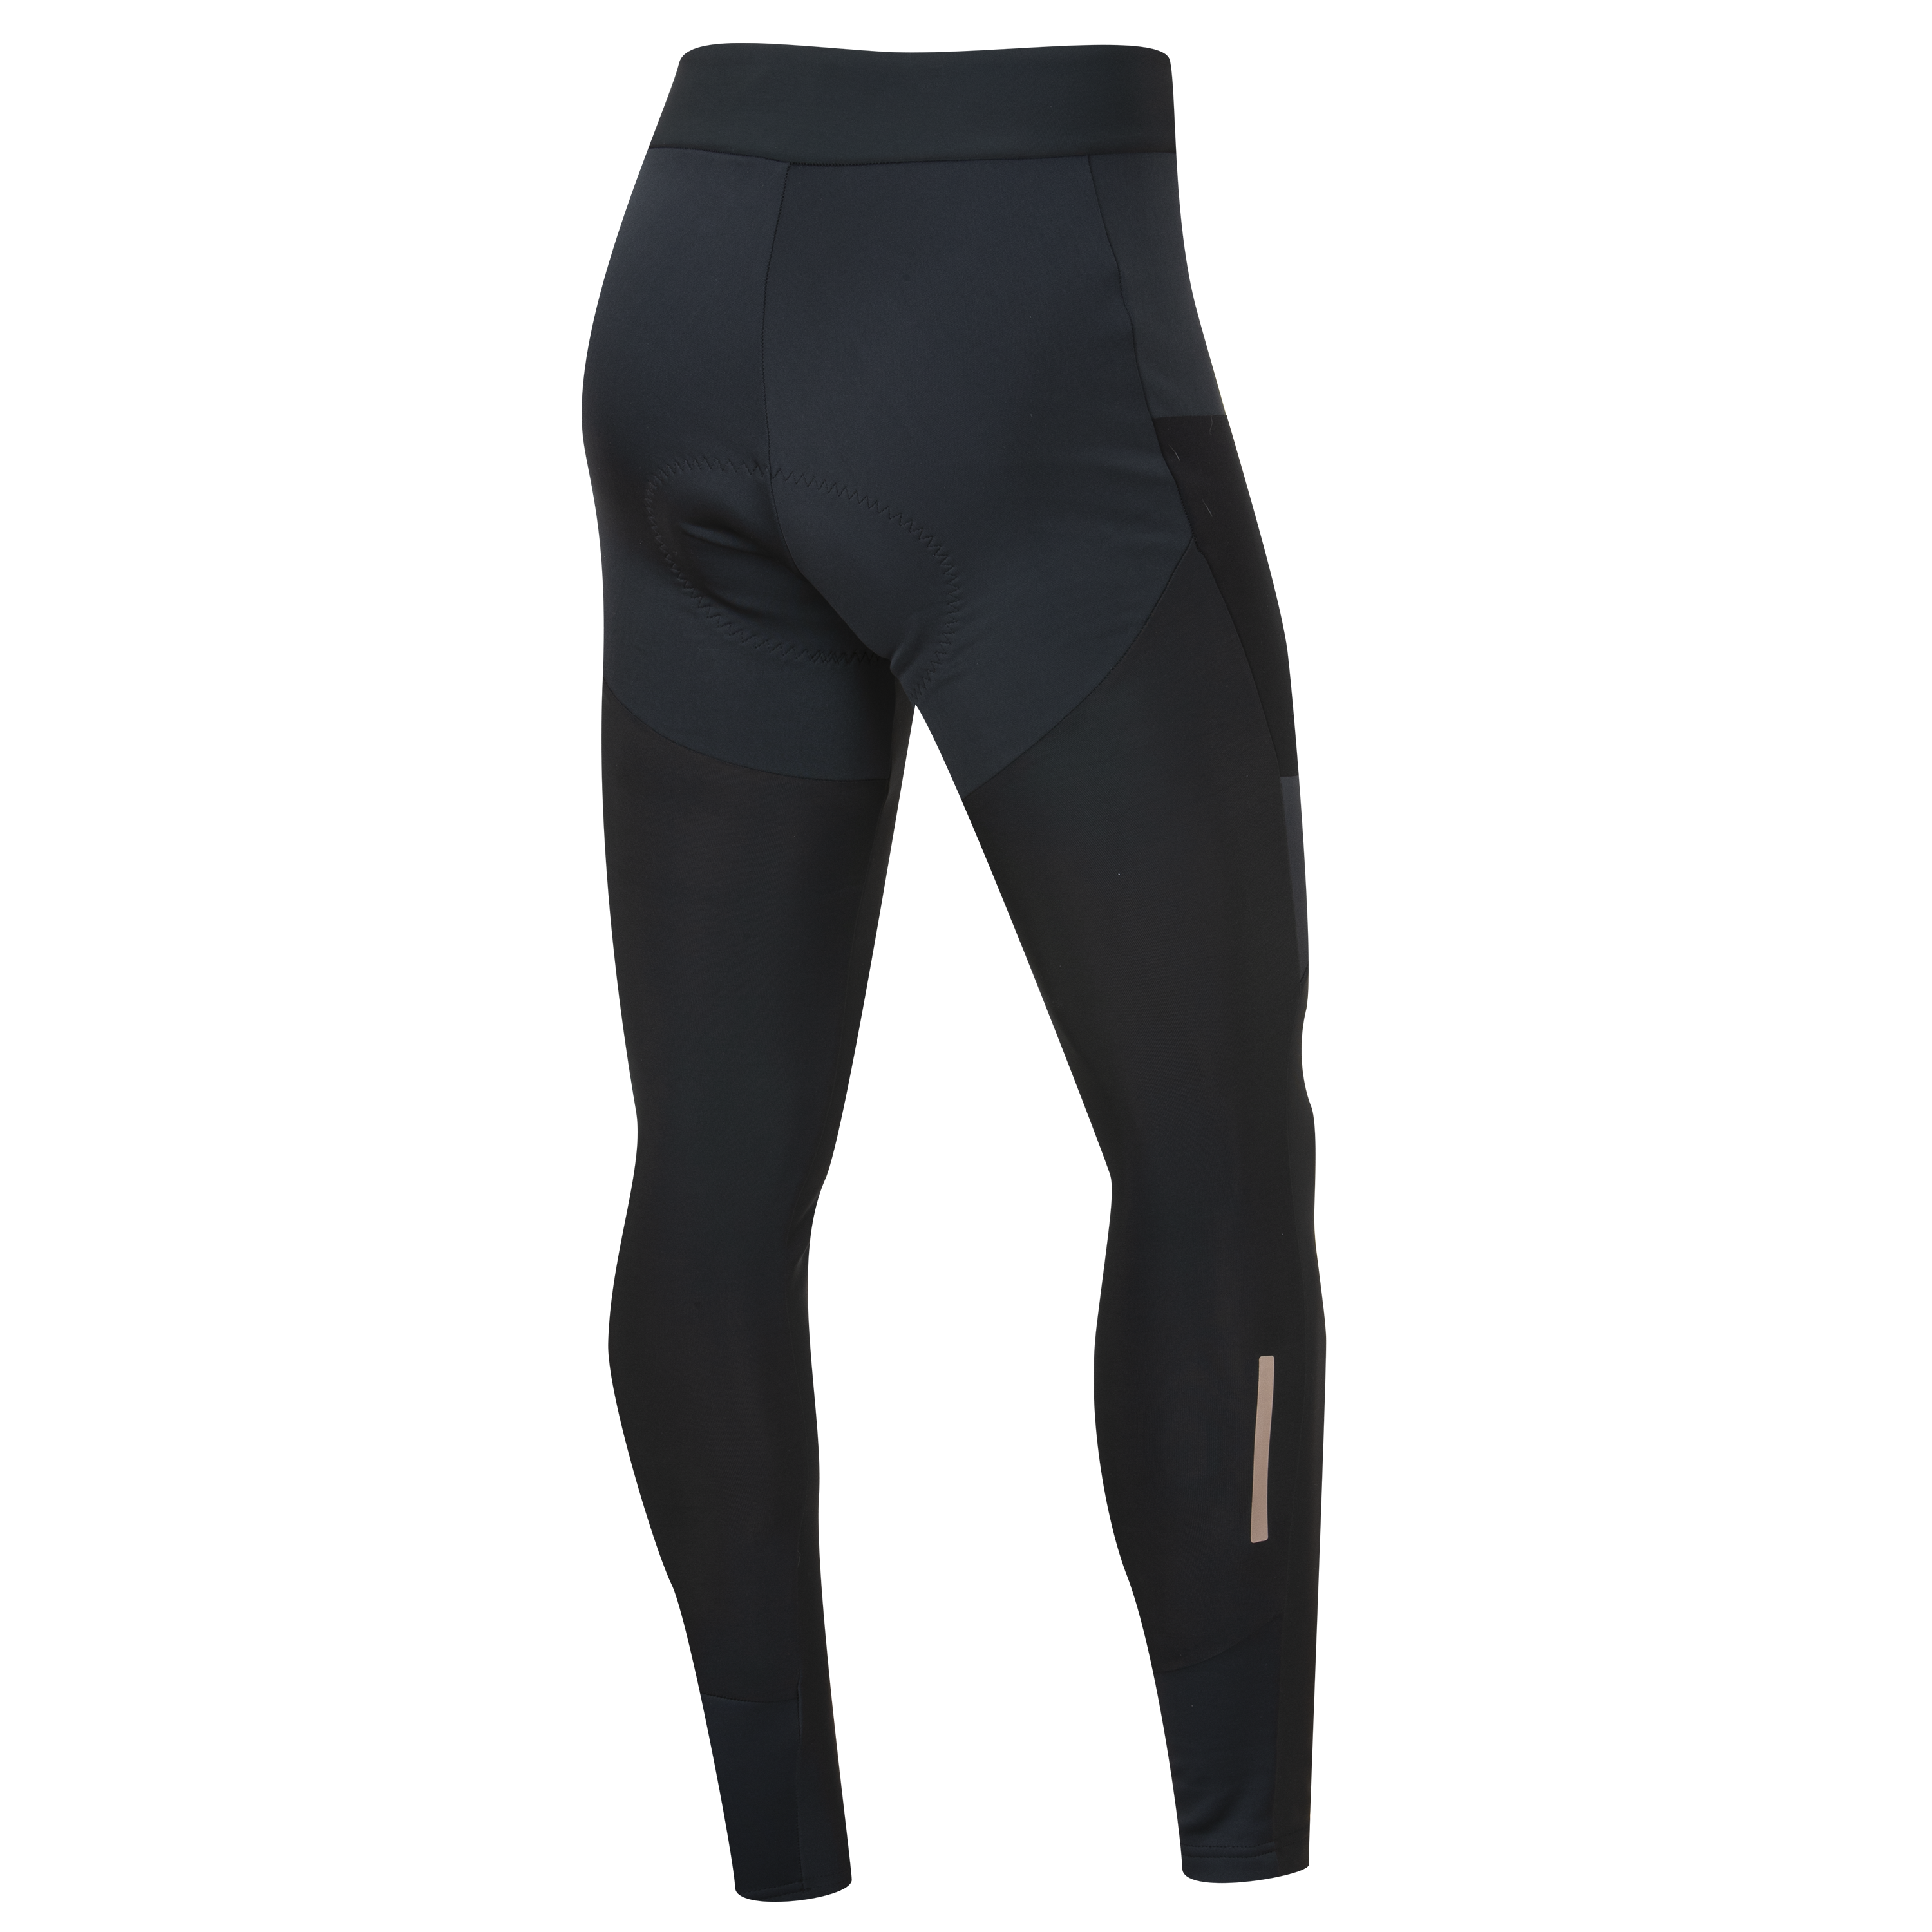 Women's Century Long Distance Padded Black Compression Cycling Tights